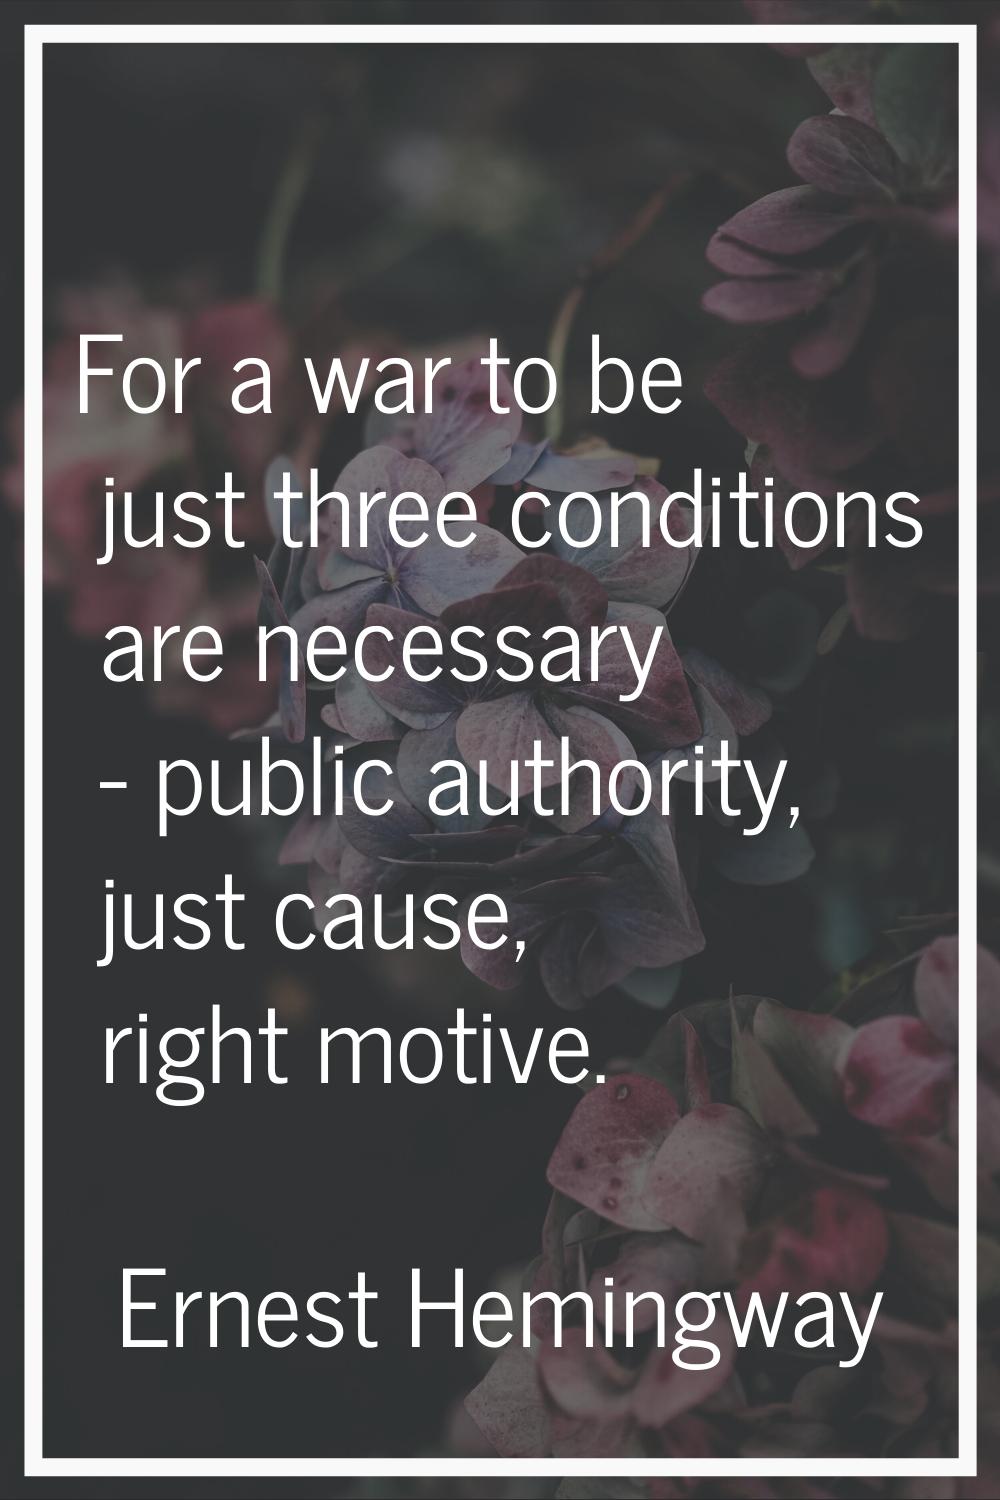 For a war to be just three conditions are necessary - public authority, just cause, right motive.